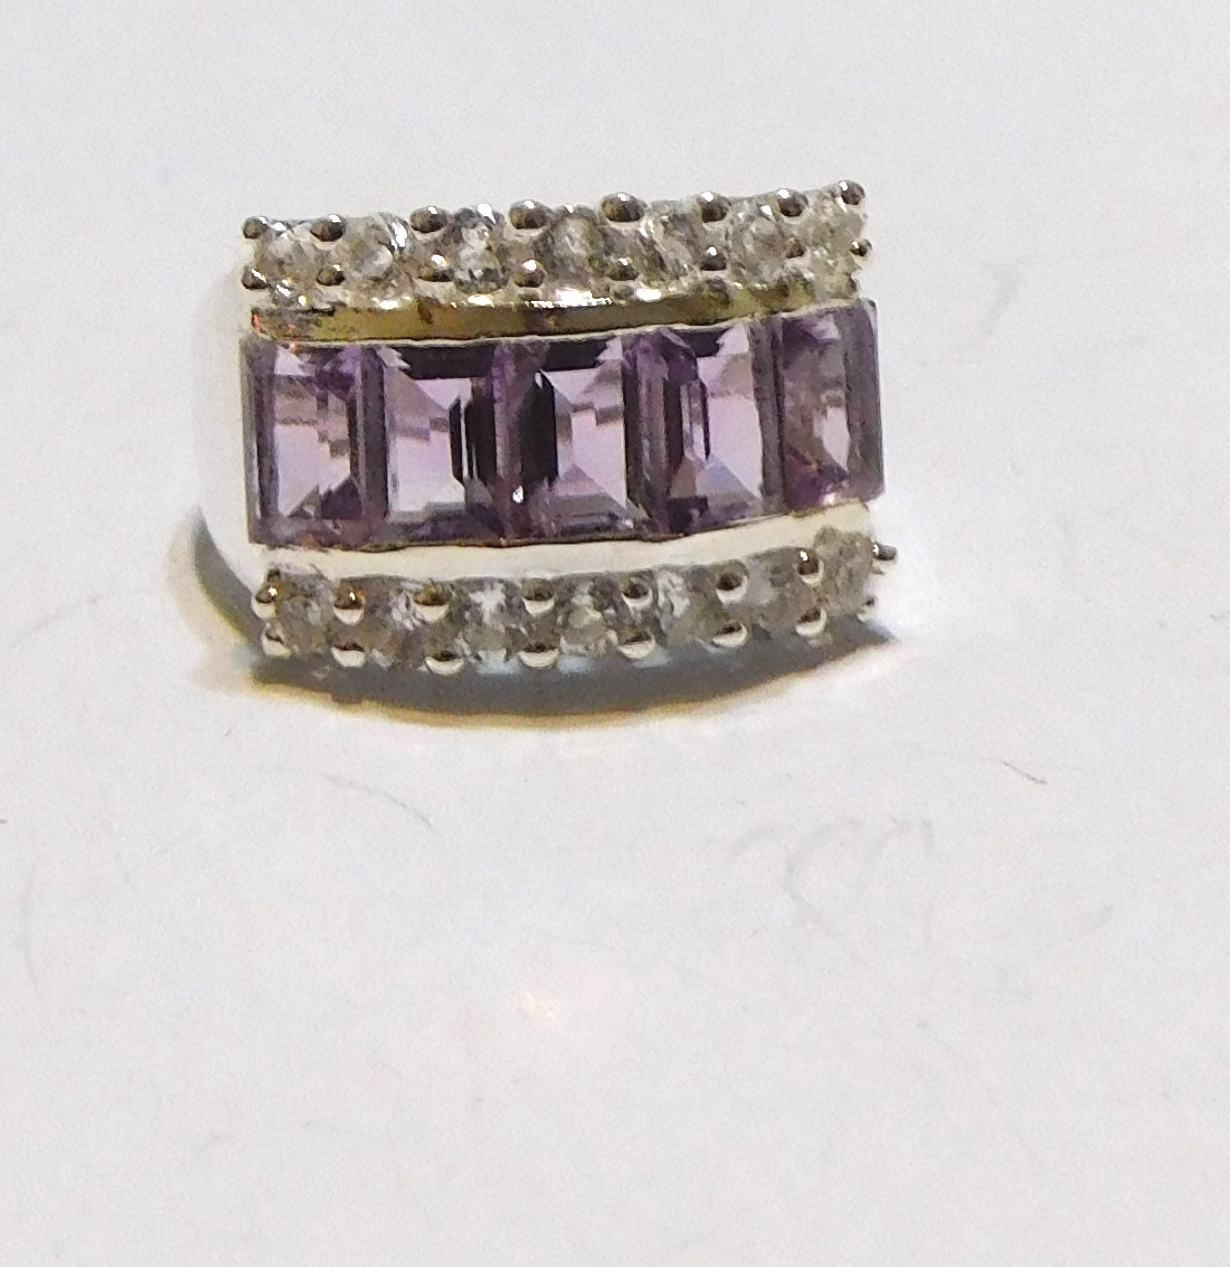 Primary image for PURPLE AMETHYST OCTAGON & WHITE TOPAZ BAND RING, 925 SILVER, SIZE 7, 3.37(TCW)